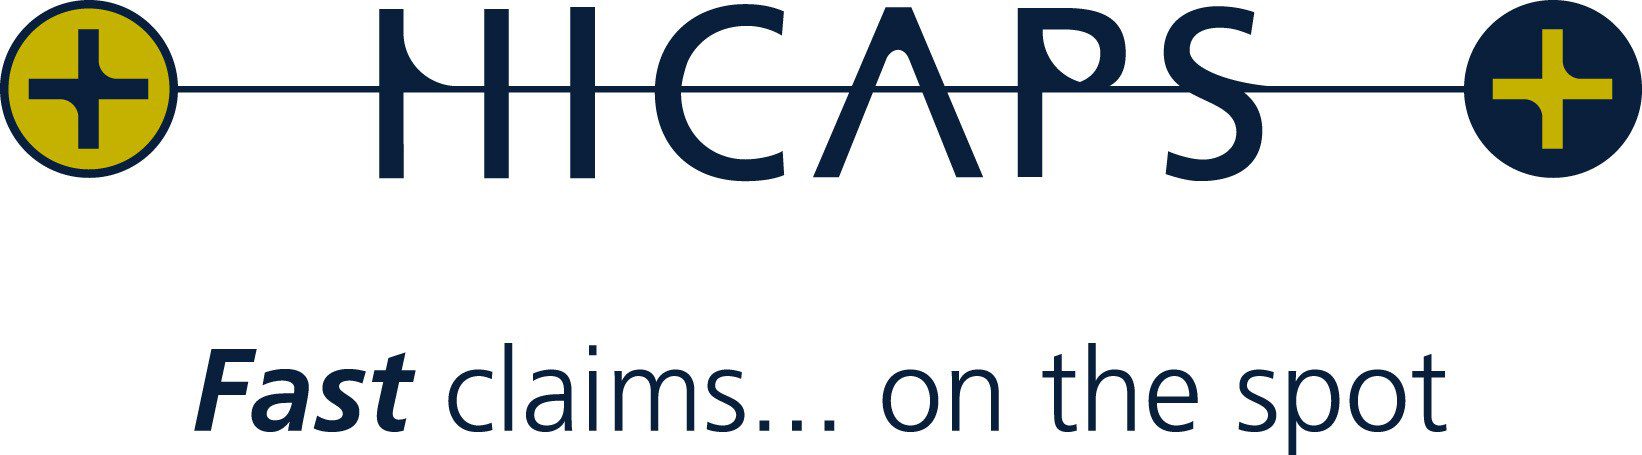 HICAPS-Logo-large